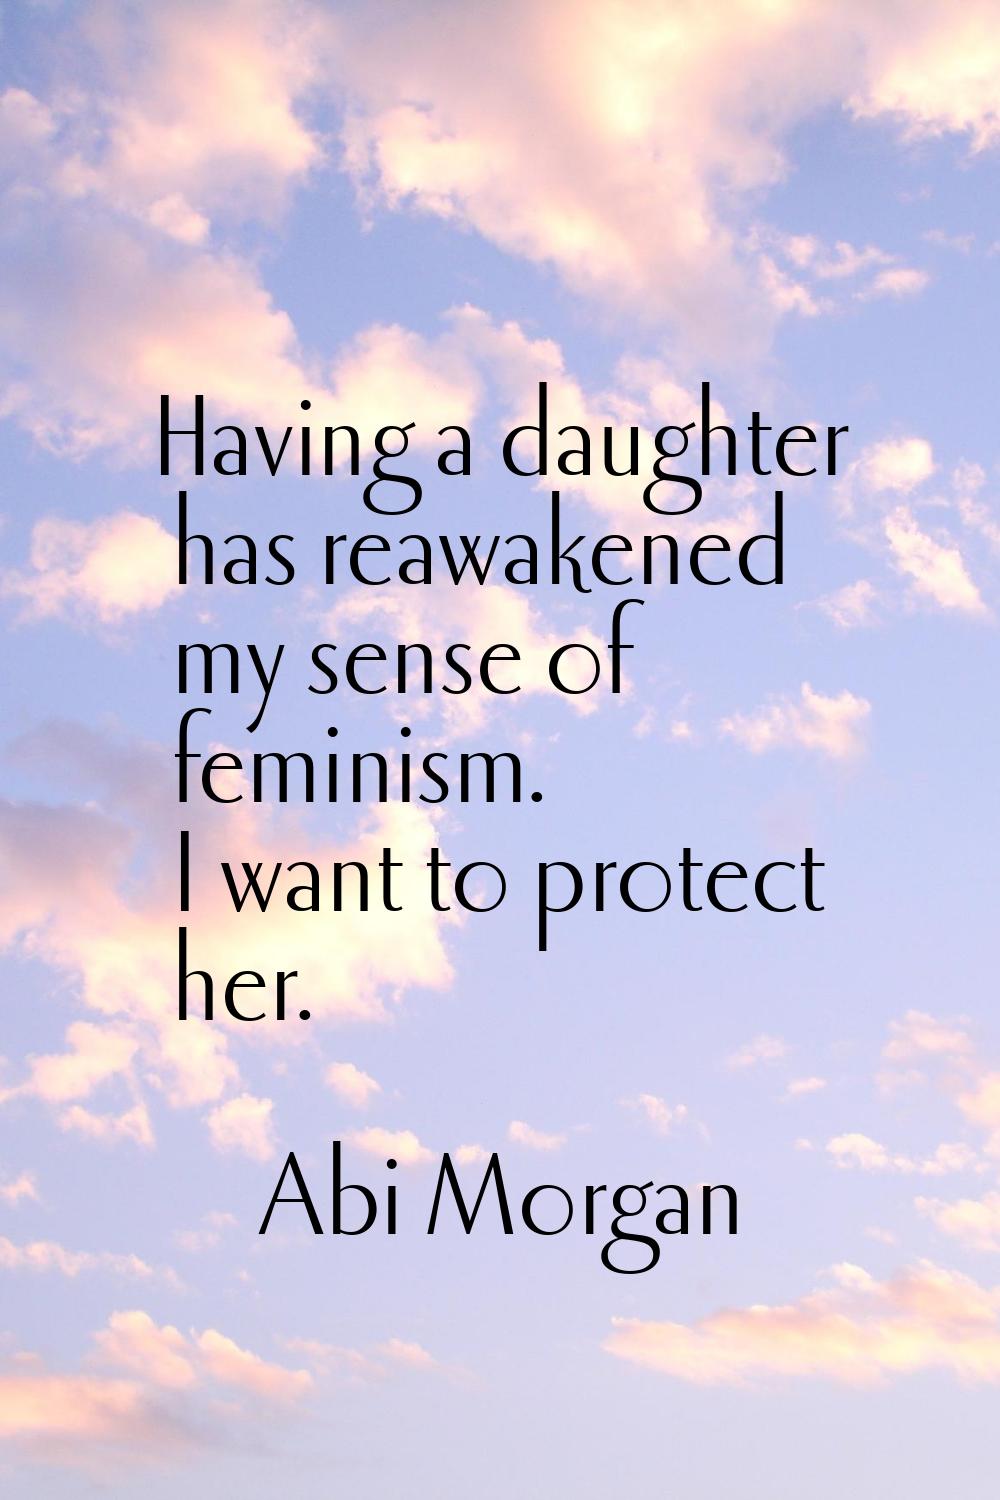 Having a daughter has reawakened my sense of feminism. I want to protect her.